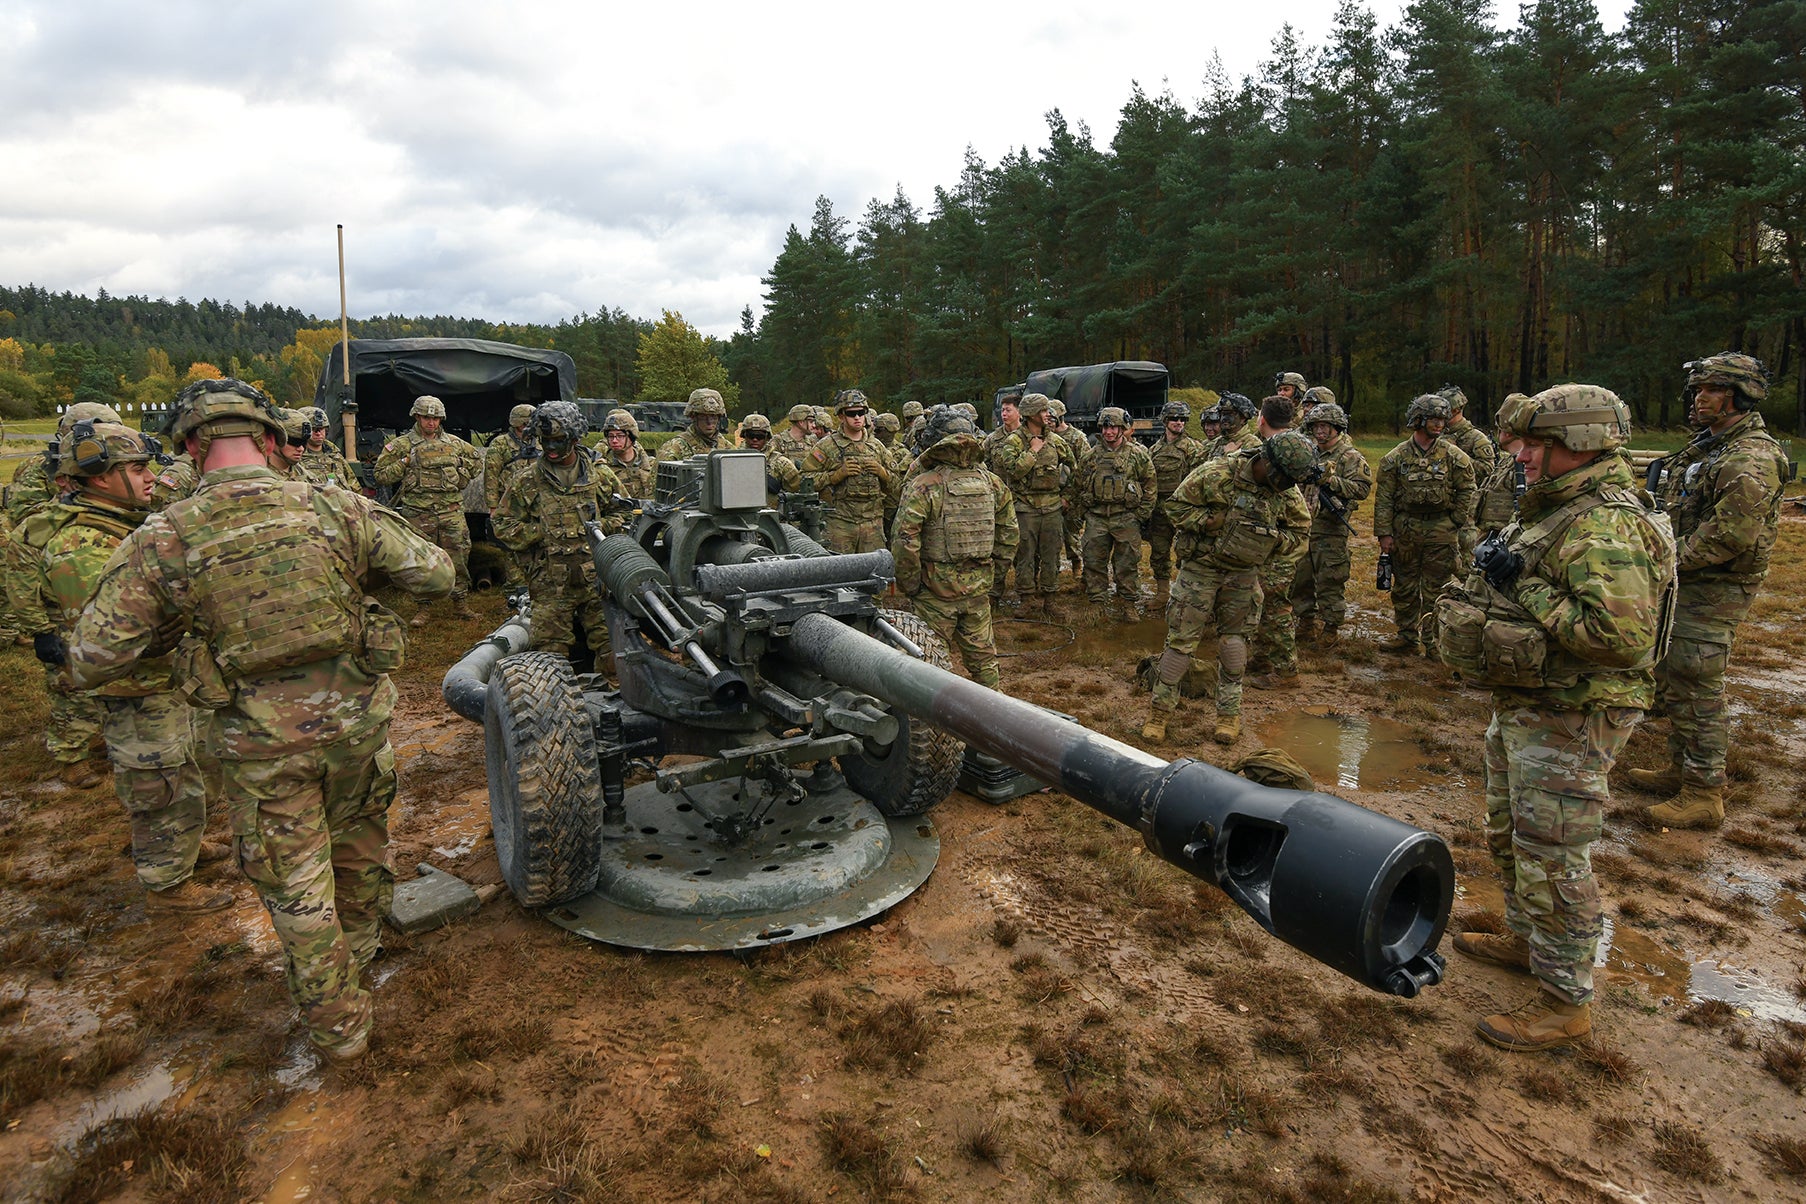 Soldiers with the 173rd Airborne Brigade and the 2nd Cavalry Regiment train on an M119 howitzer at Grafenwoehr Training Area, Germany. (Credit: U.S. Army/Markus Rauchenberger)